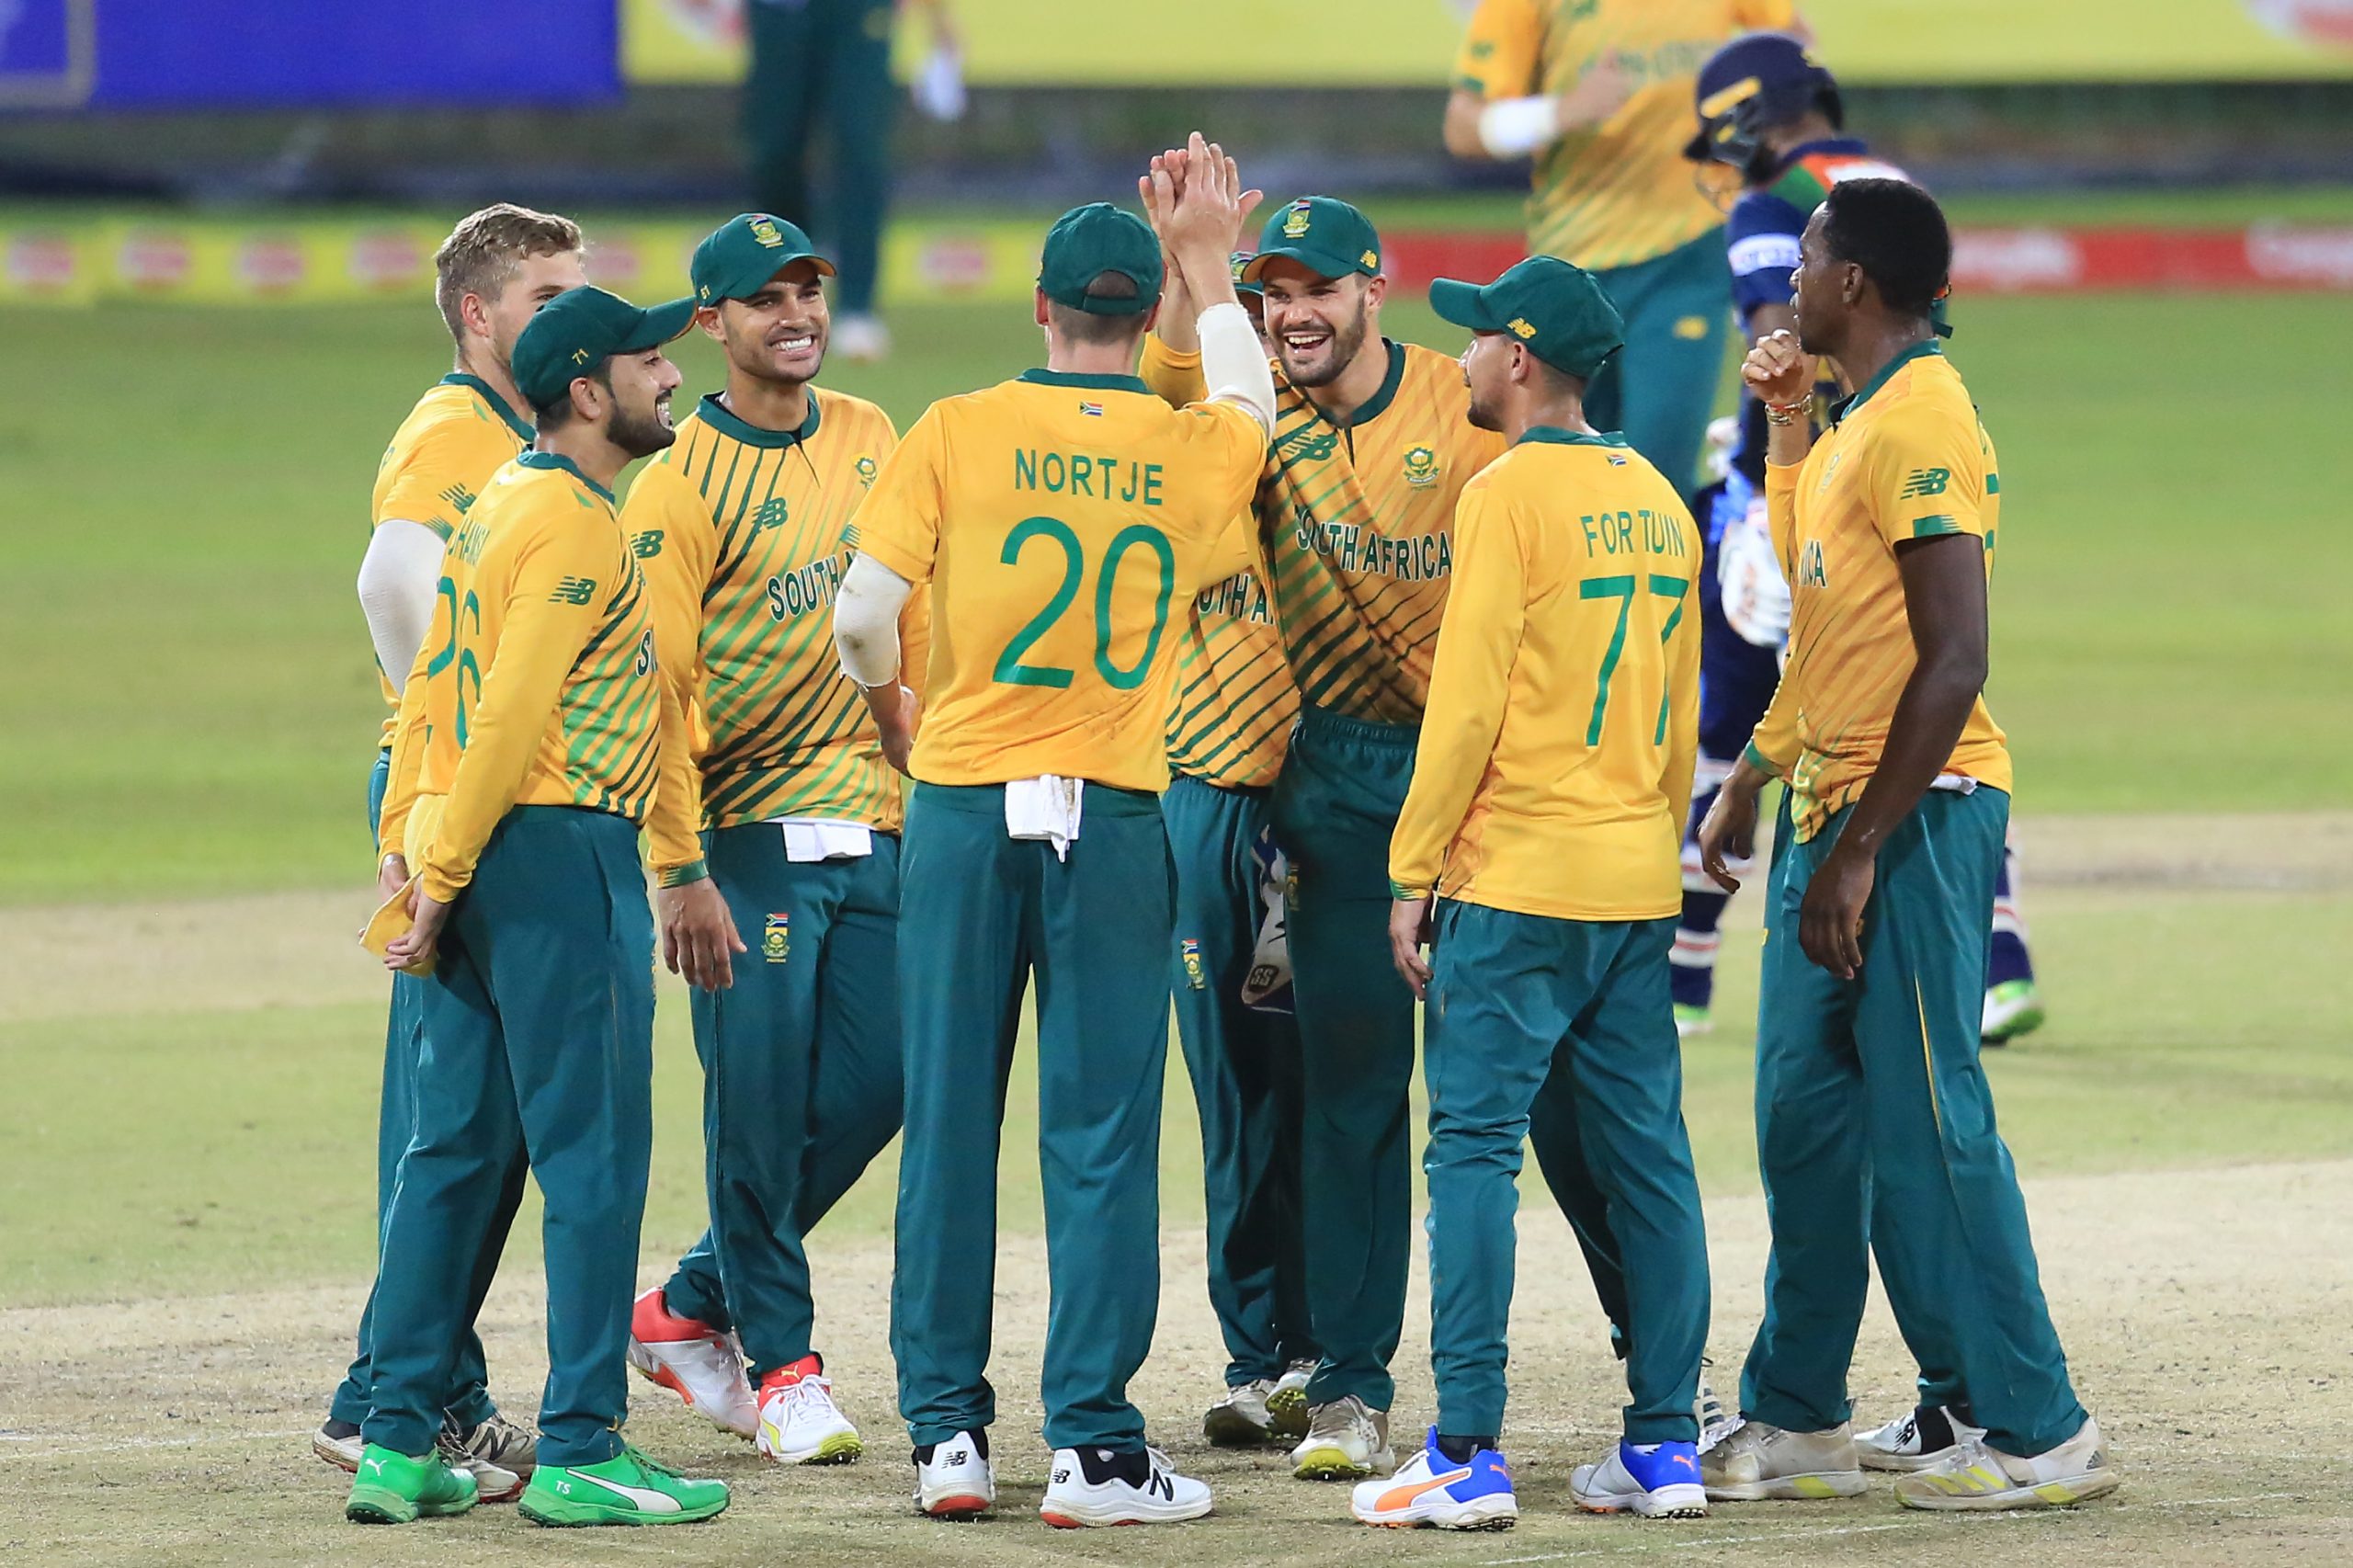 South Africa sweep to 9-wkt. win to take series with one to go